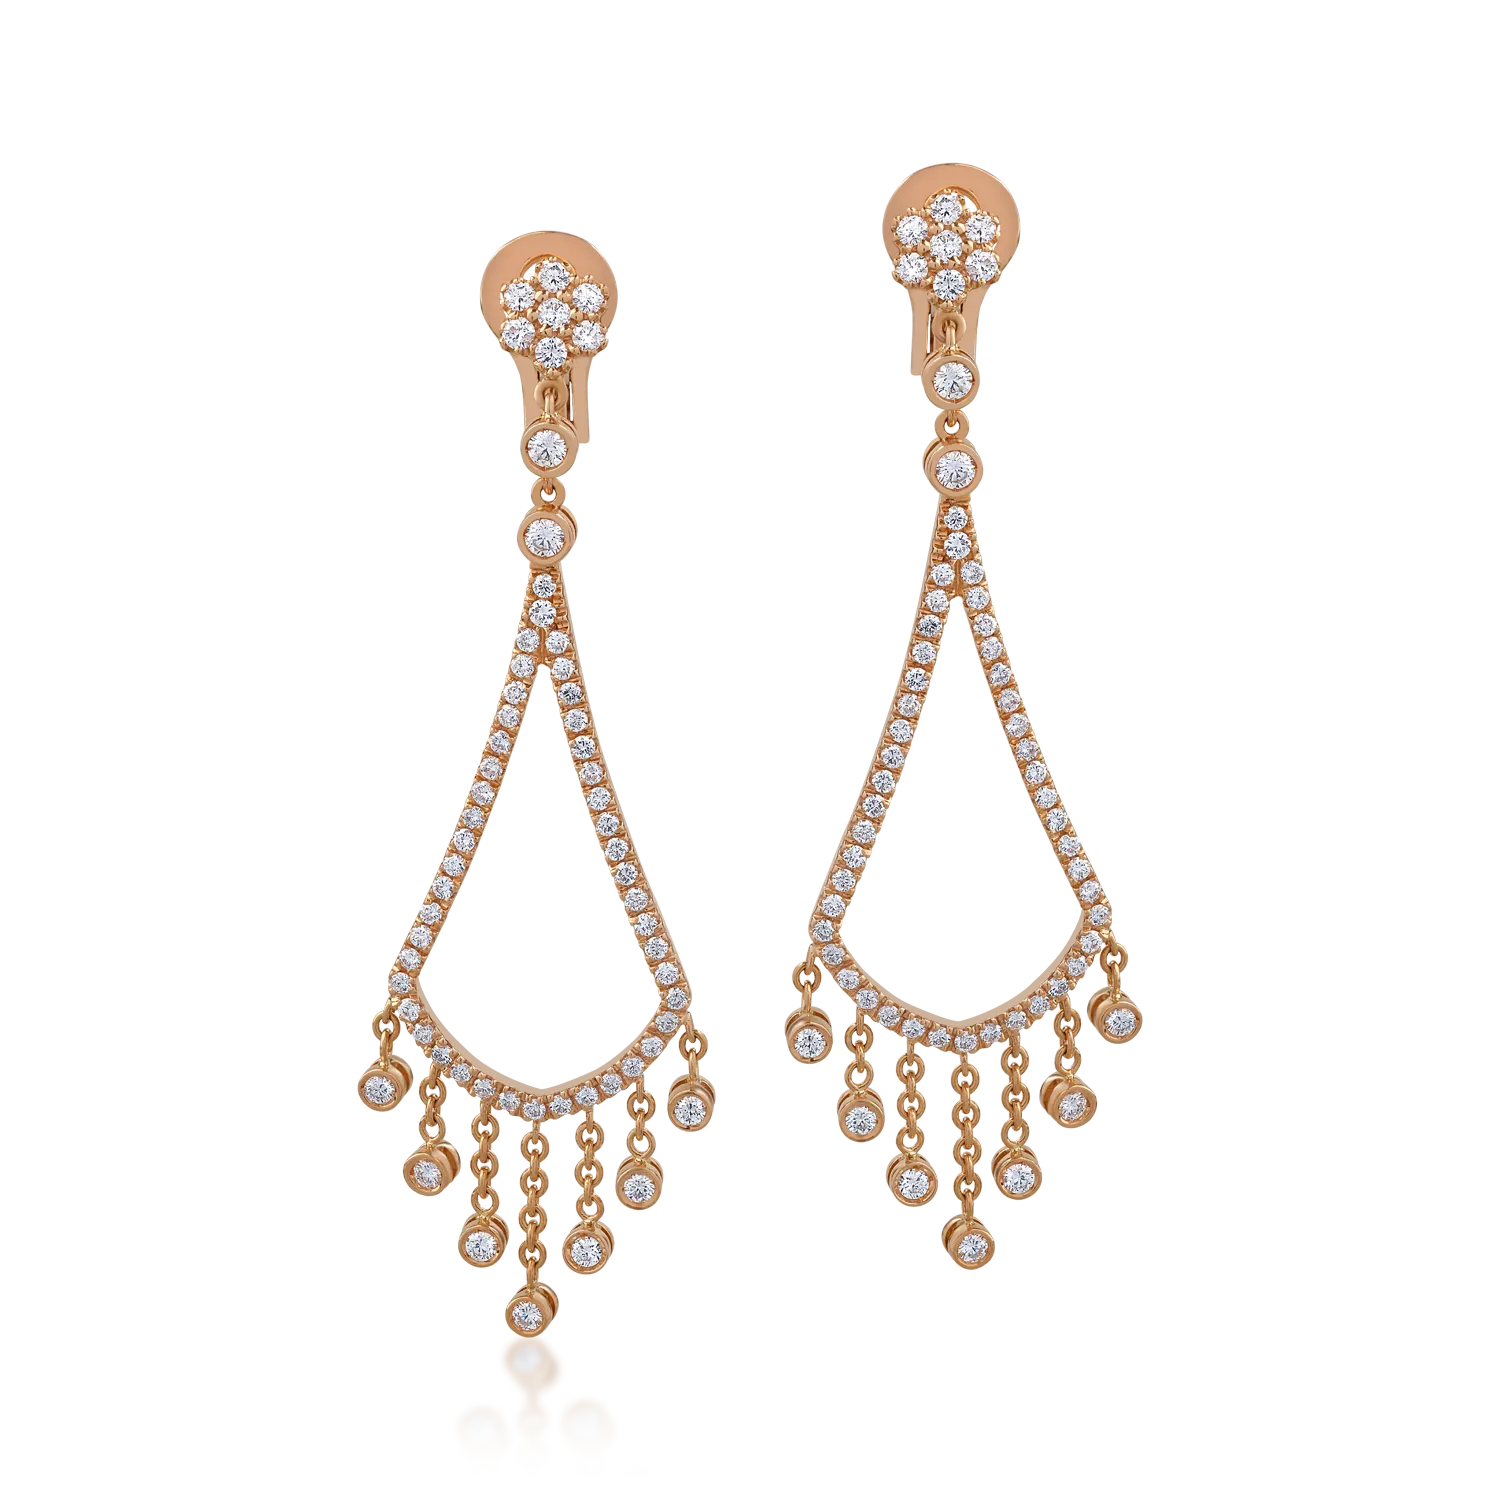 18K rose gold earrings with 1.91ct diamonds